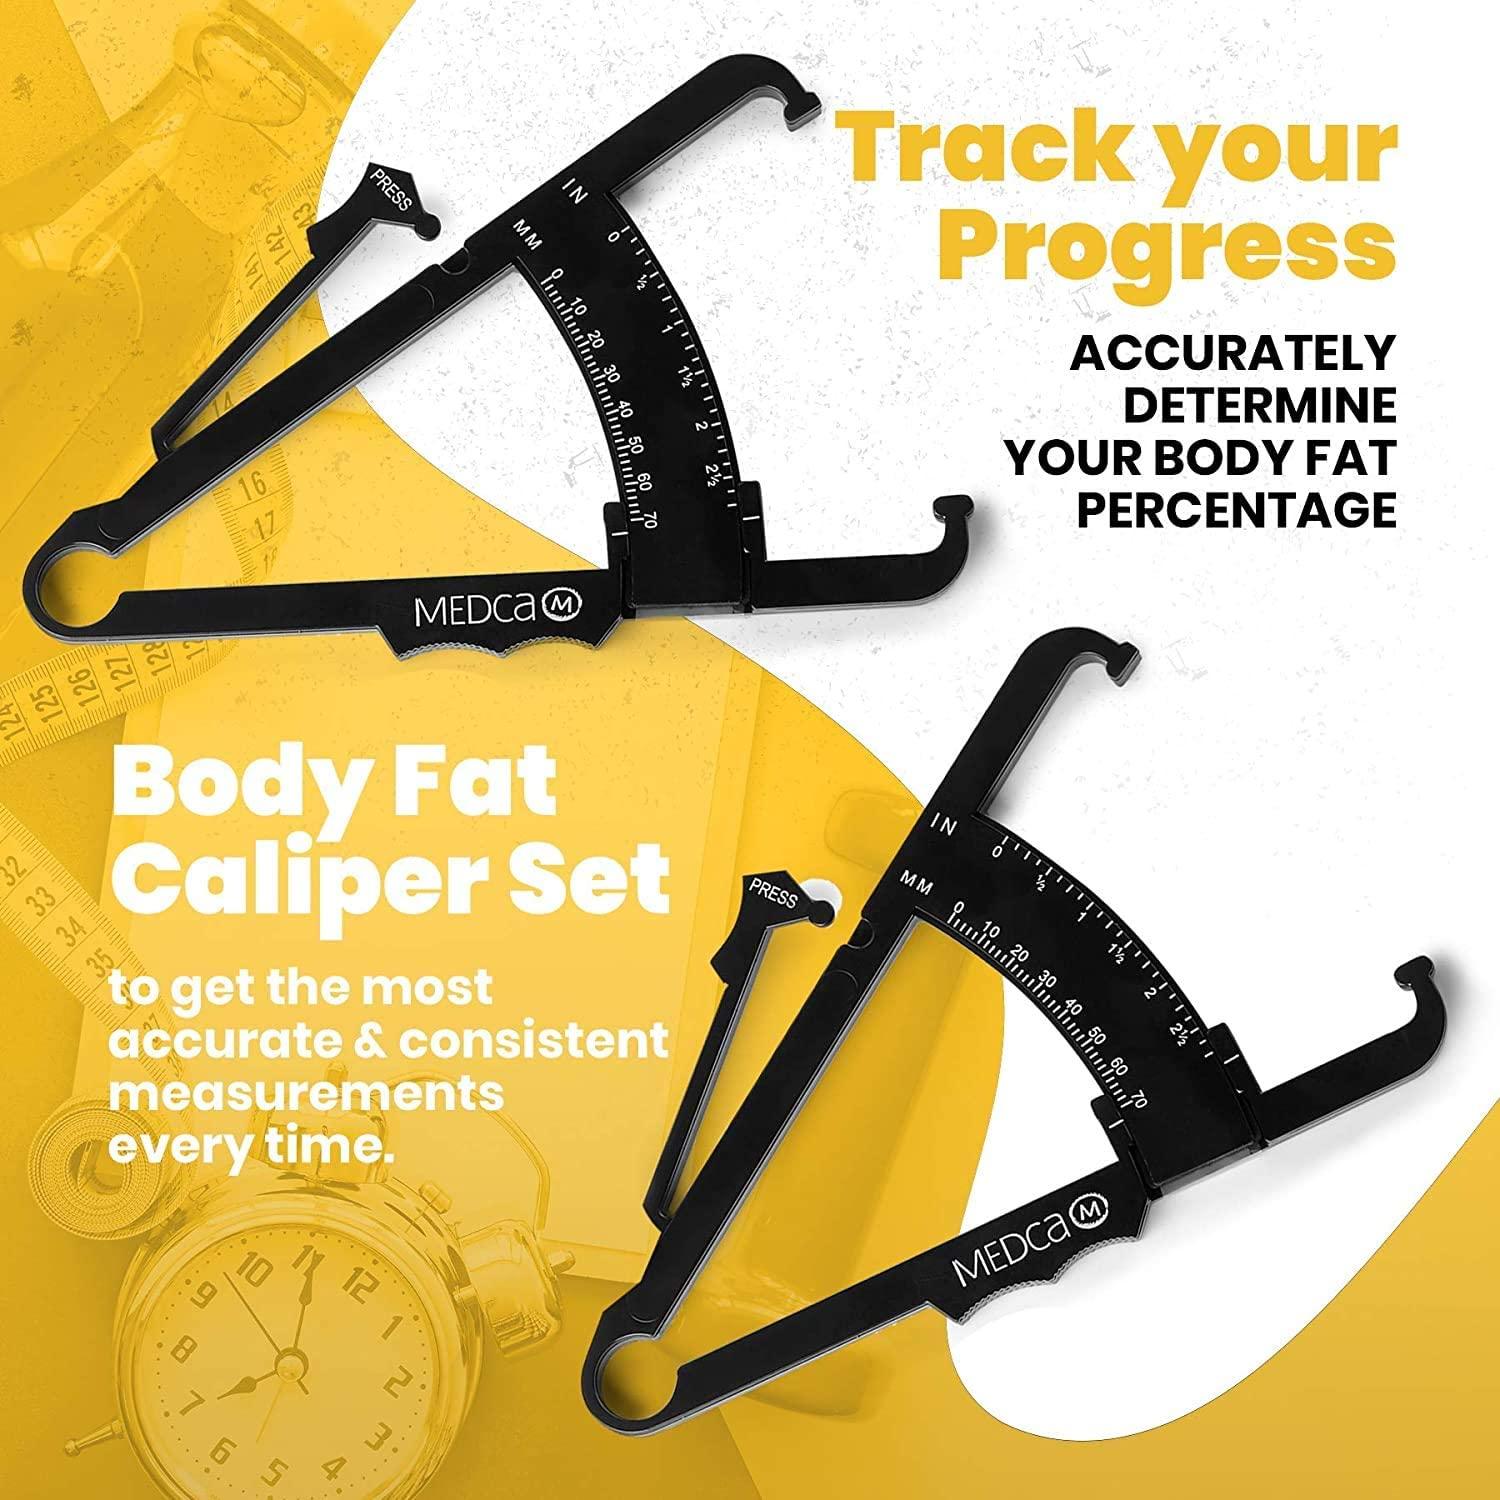 Accurately Measure Your Body Fat Levels with this Handheld BMI Body Fat  Measurement Device - Perfect for Men and Women!